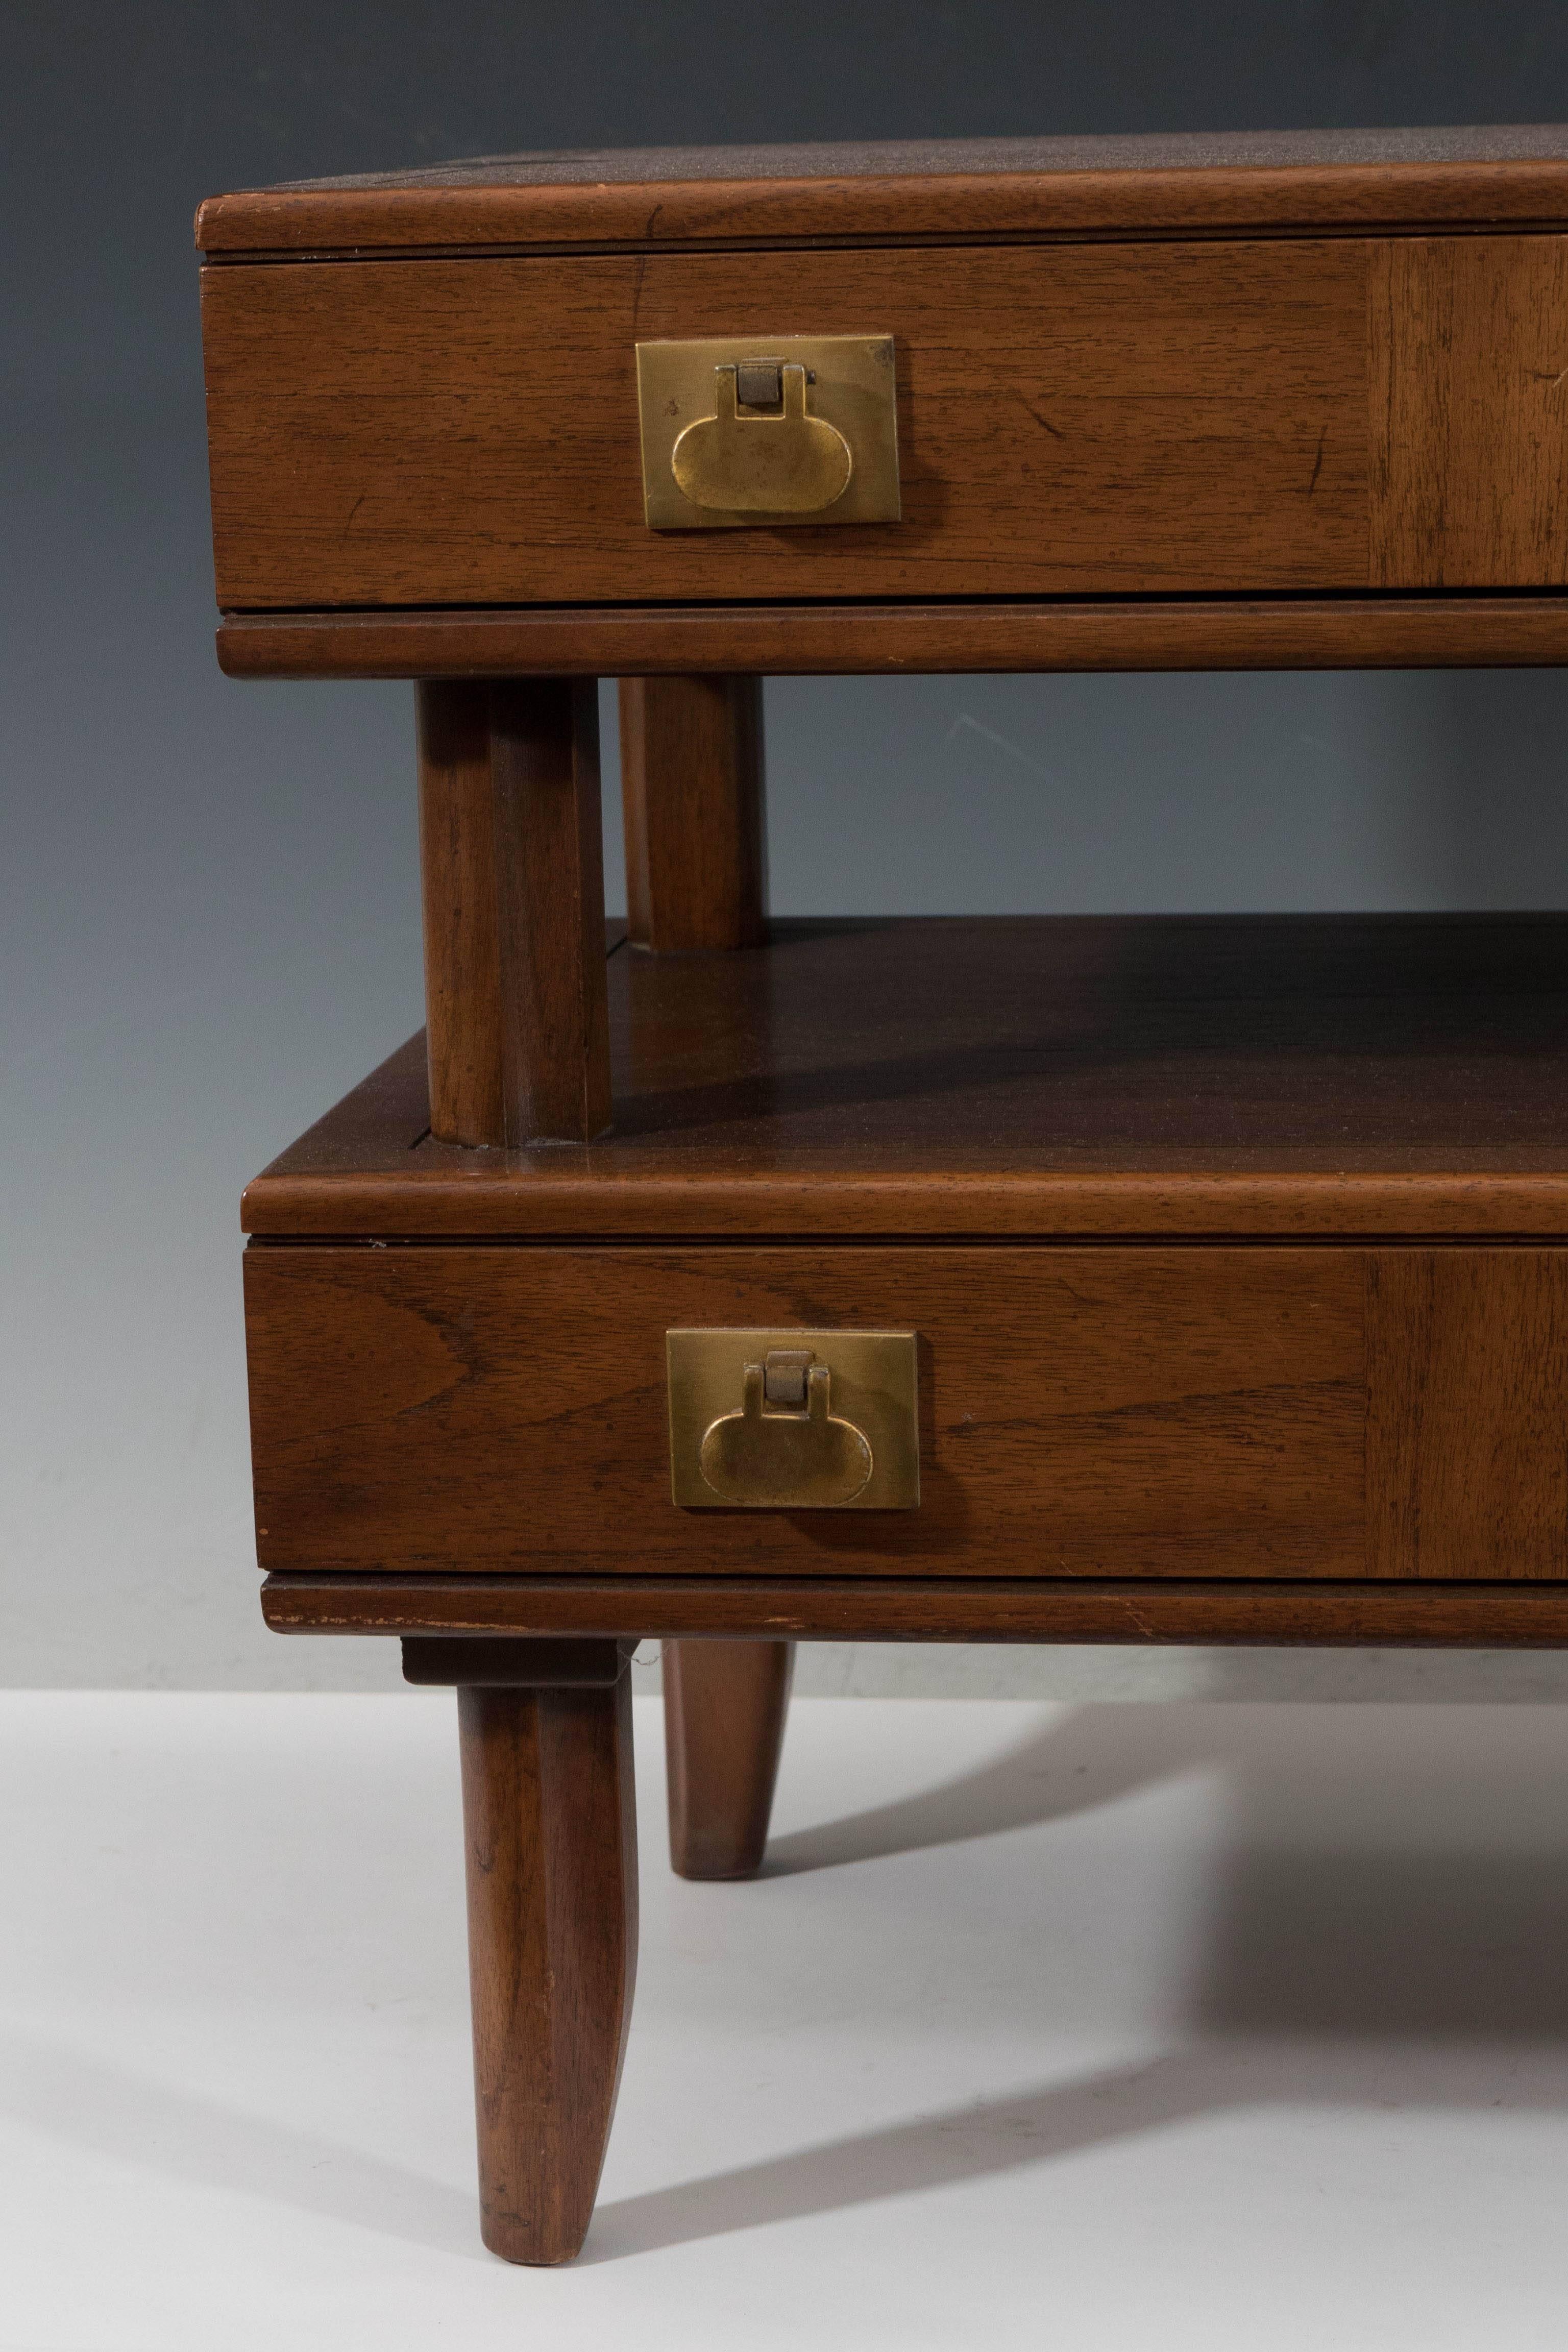 A vintage small chest of drawers in wood, produced by Mastercraft circa 1970s, the drawers separated into two tiers, with brass pulls, raised on tapered legs. Markings include the manufacturers label [Mastercraft Furniture Co./Grand Rapids, Mich.],